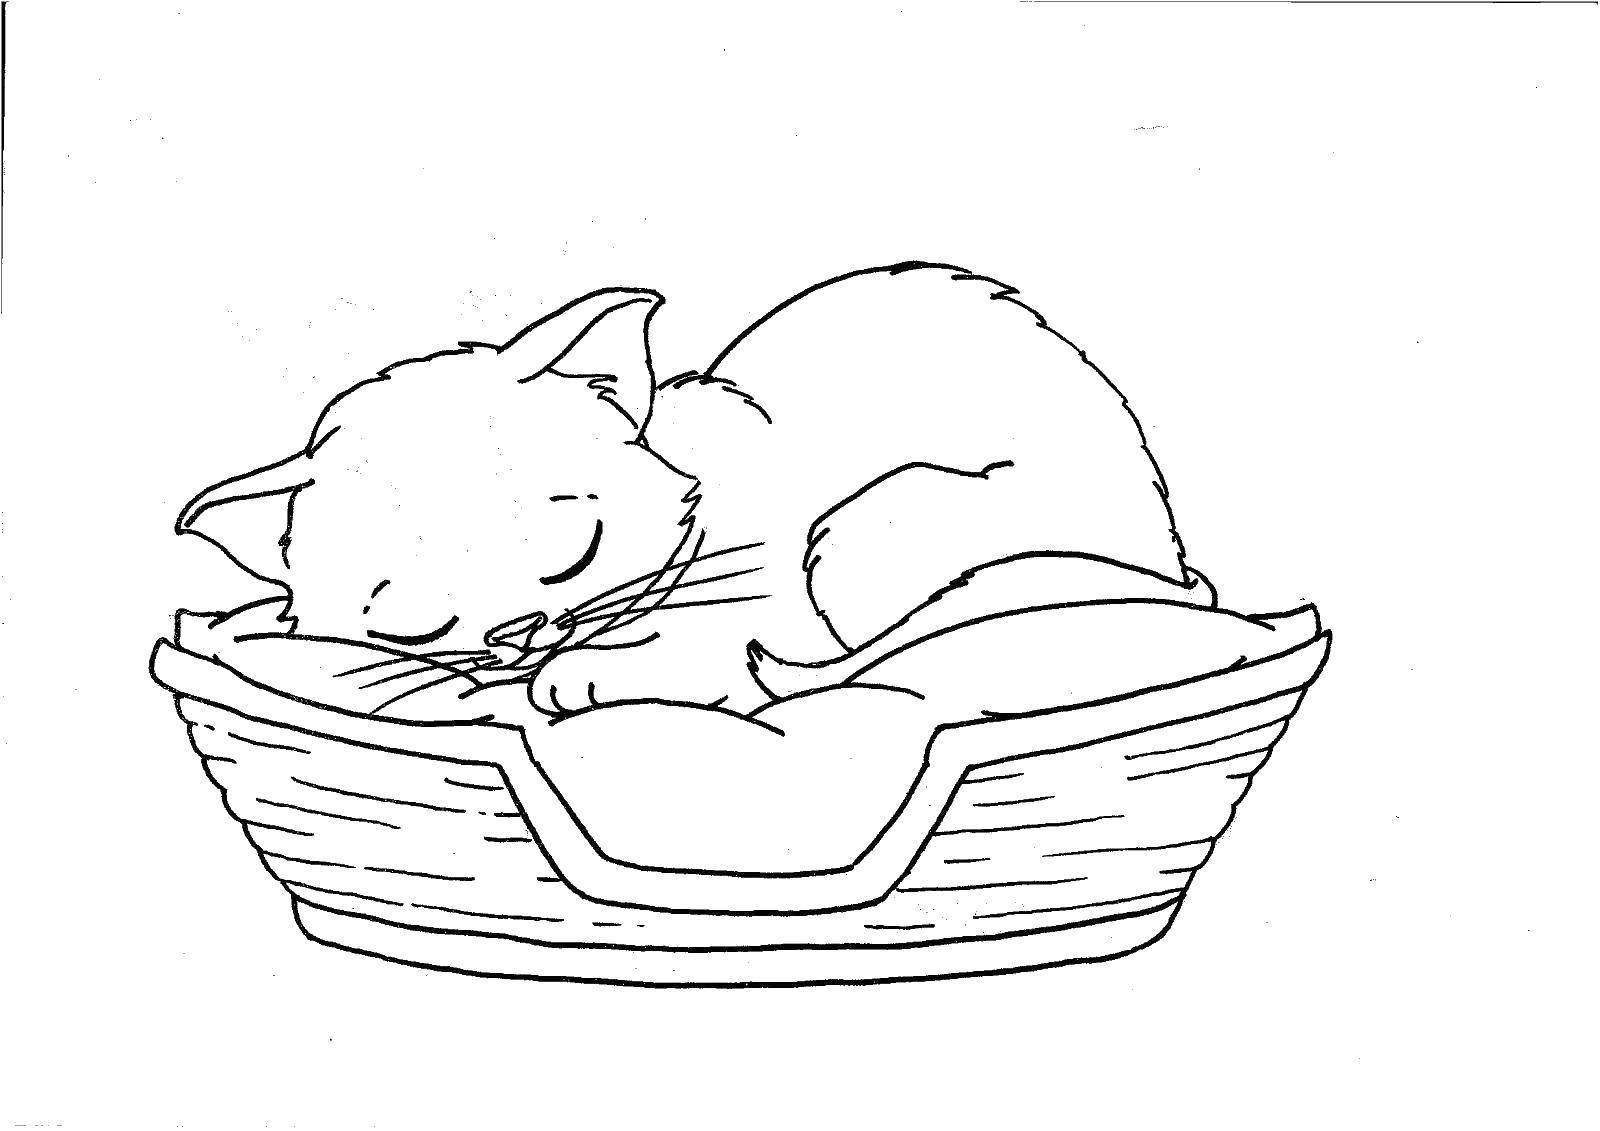 Coloring Kitty sleeps. Category Cats and kittens. Tags:  Animals, kitten.